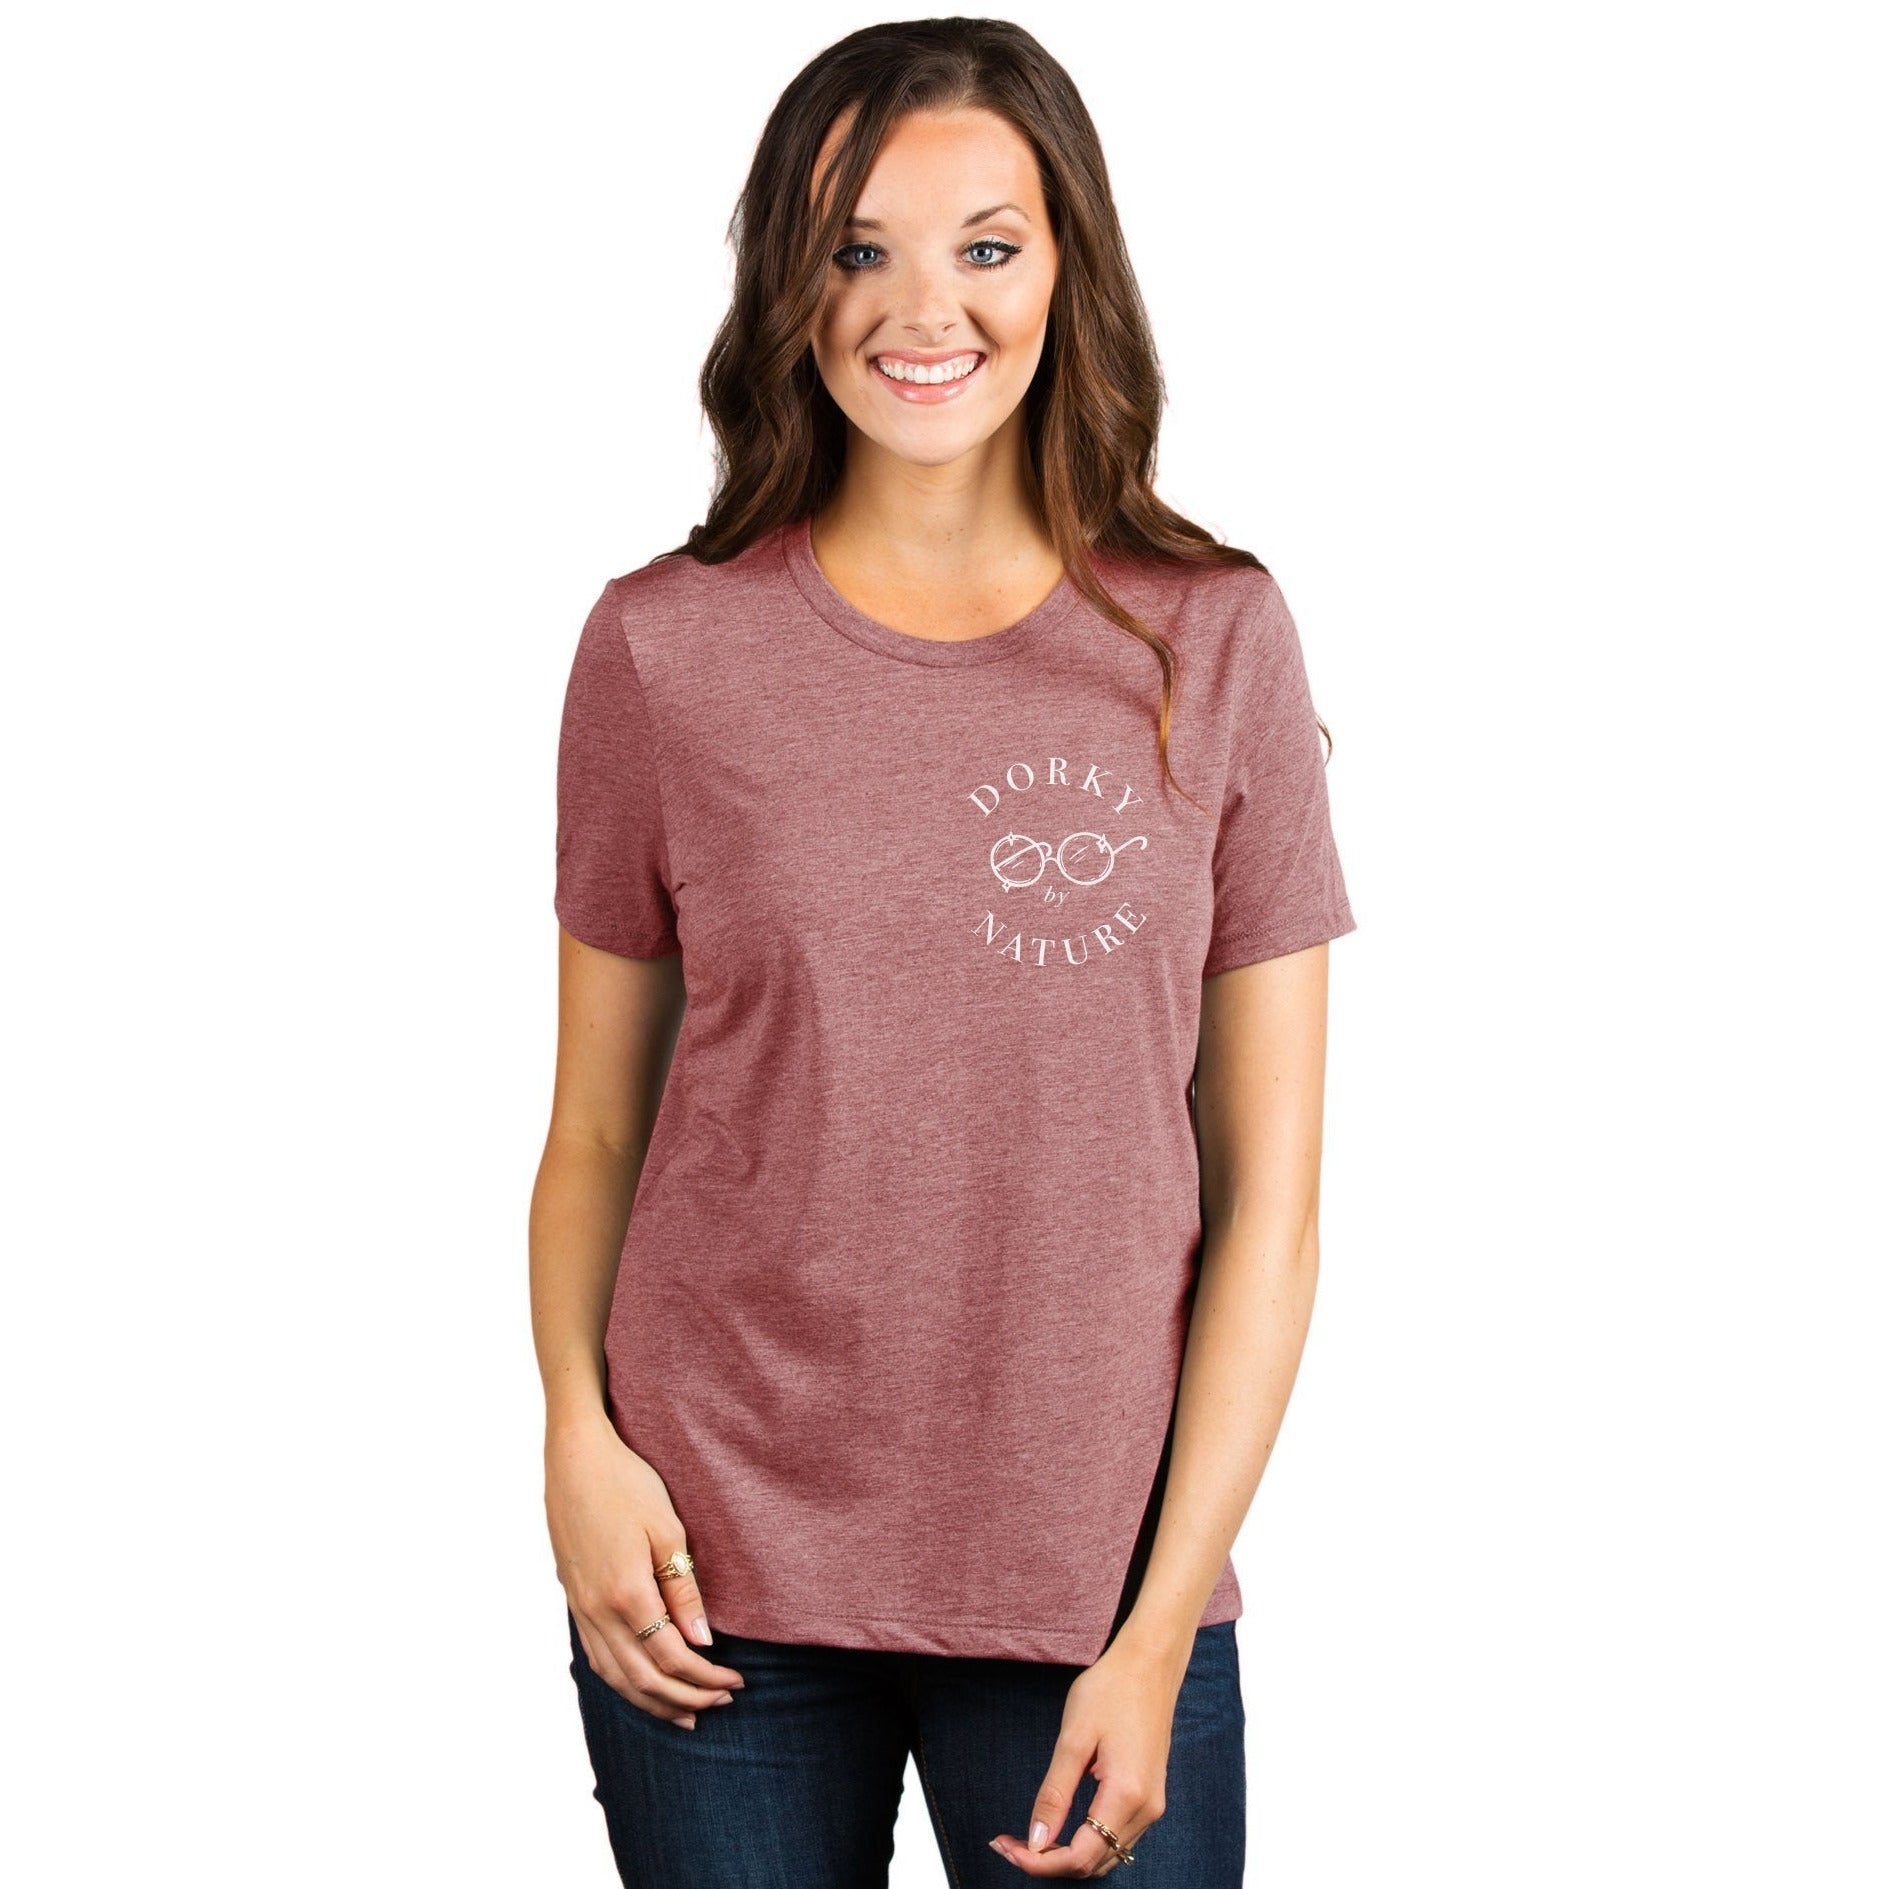 Dorky By Nature Women's Relaxed Crewneck T-Shirt Top Tee Heather Rouge Model
